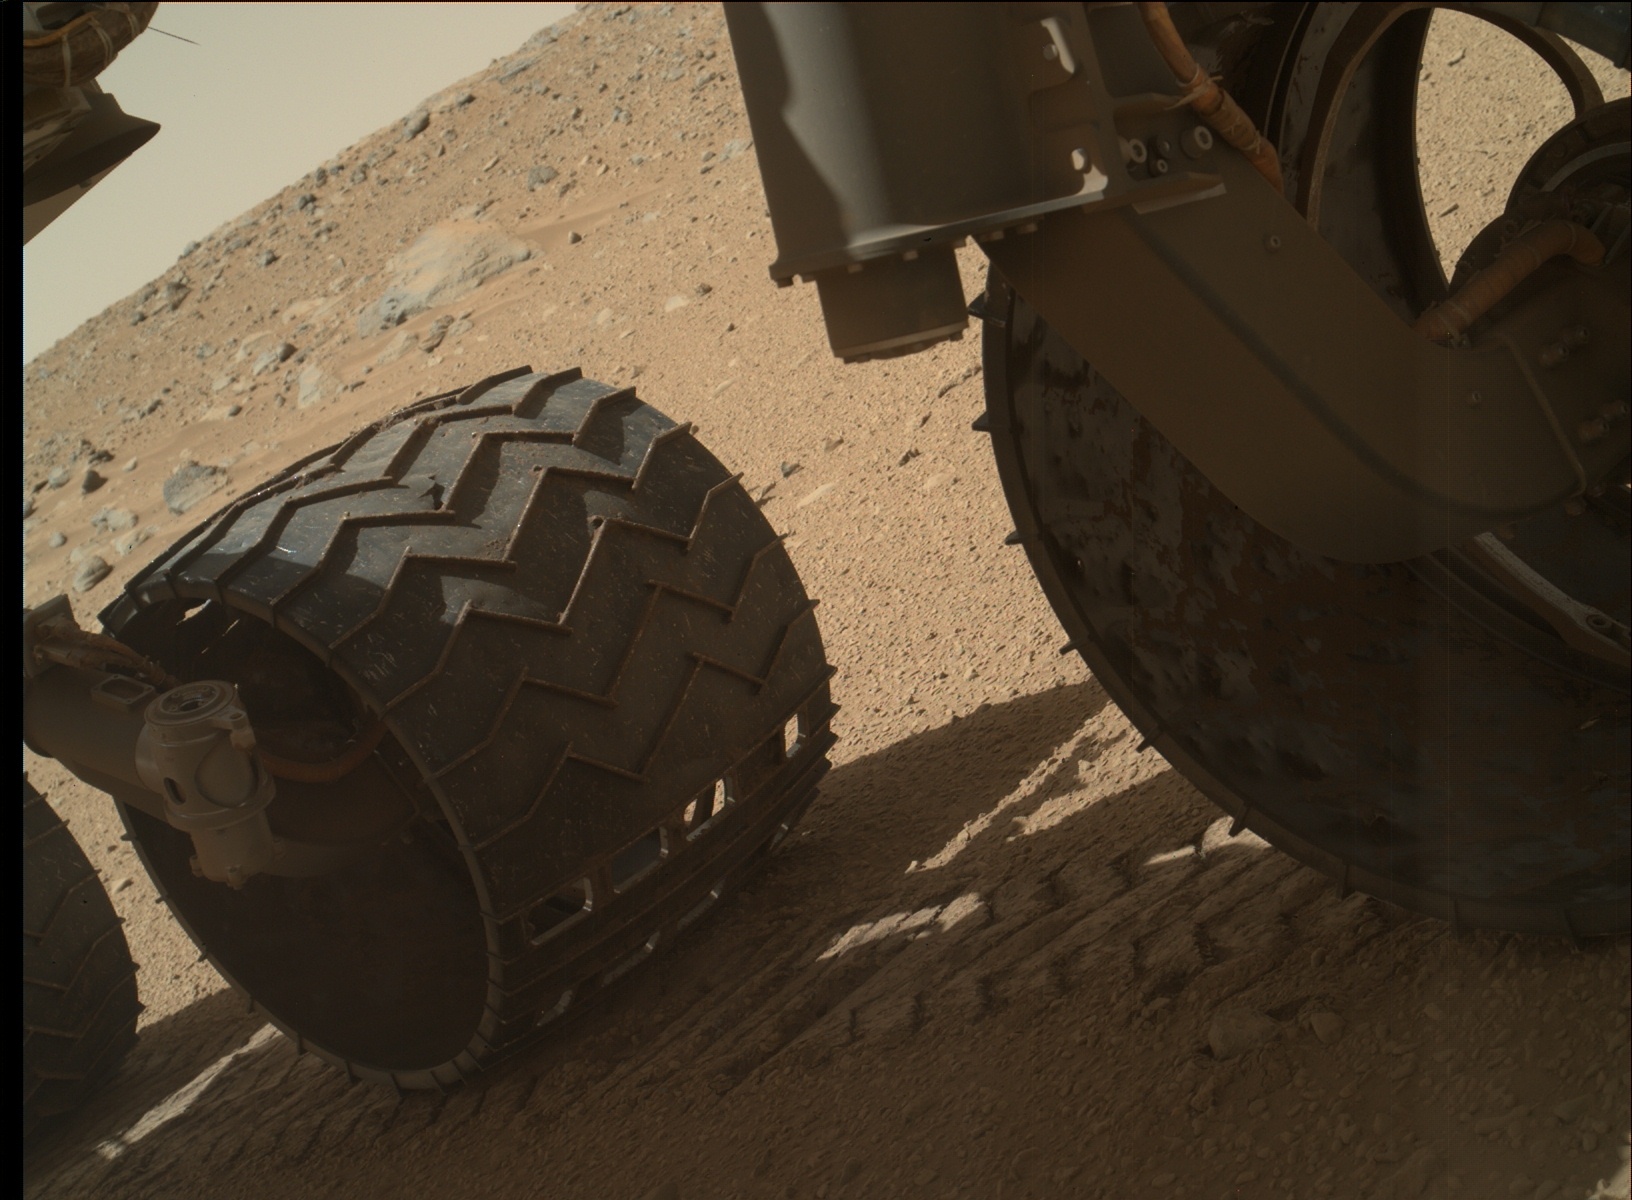 Nasa's Mars rover Curiosity acquired this image using its Mars Hand Lens Imager (MAHLI) on Sol 521